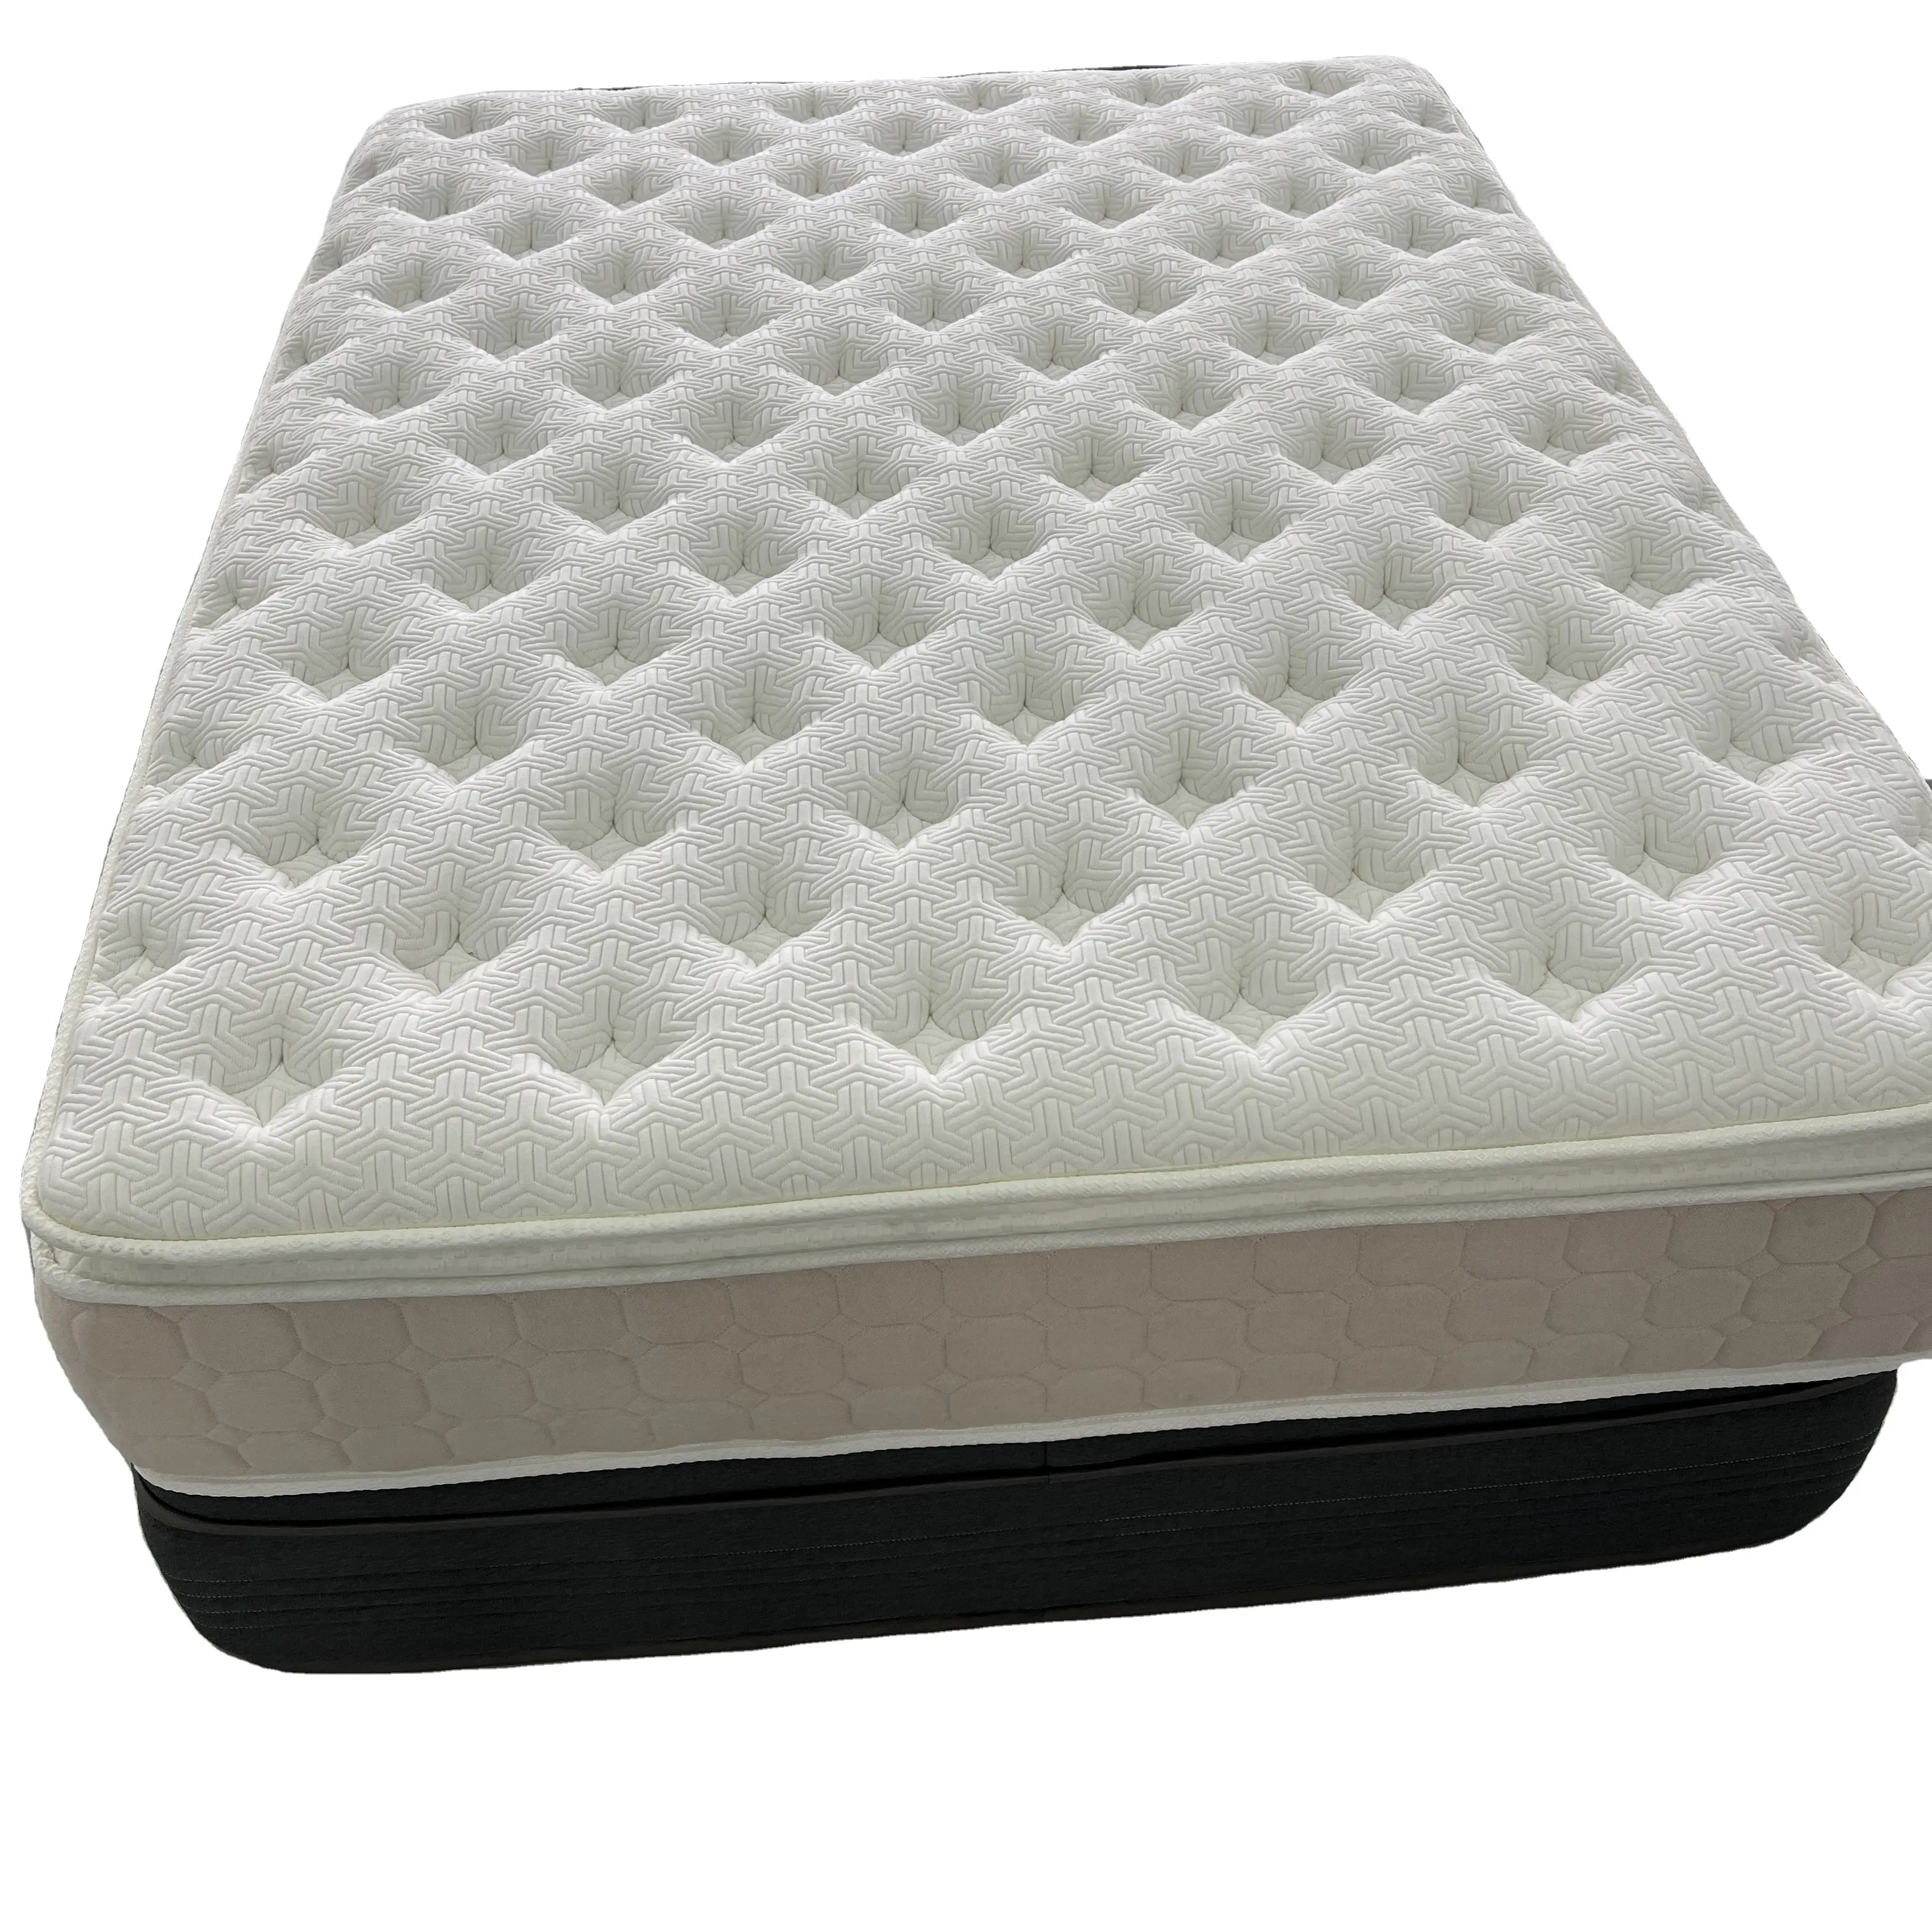 Twin queen Size Bed Double Sleeping Well Single Double massage pillow top Memory Foam Pocket Spring Mattress mattresses price